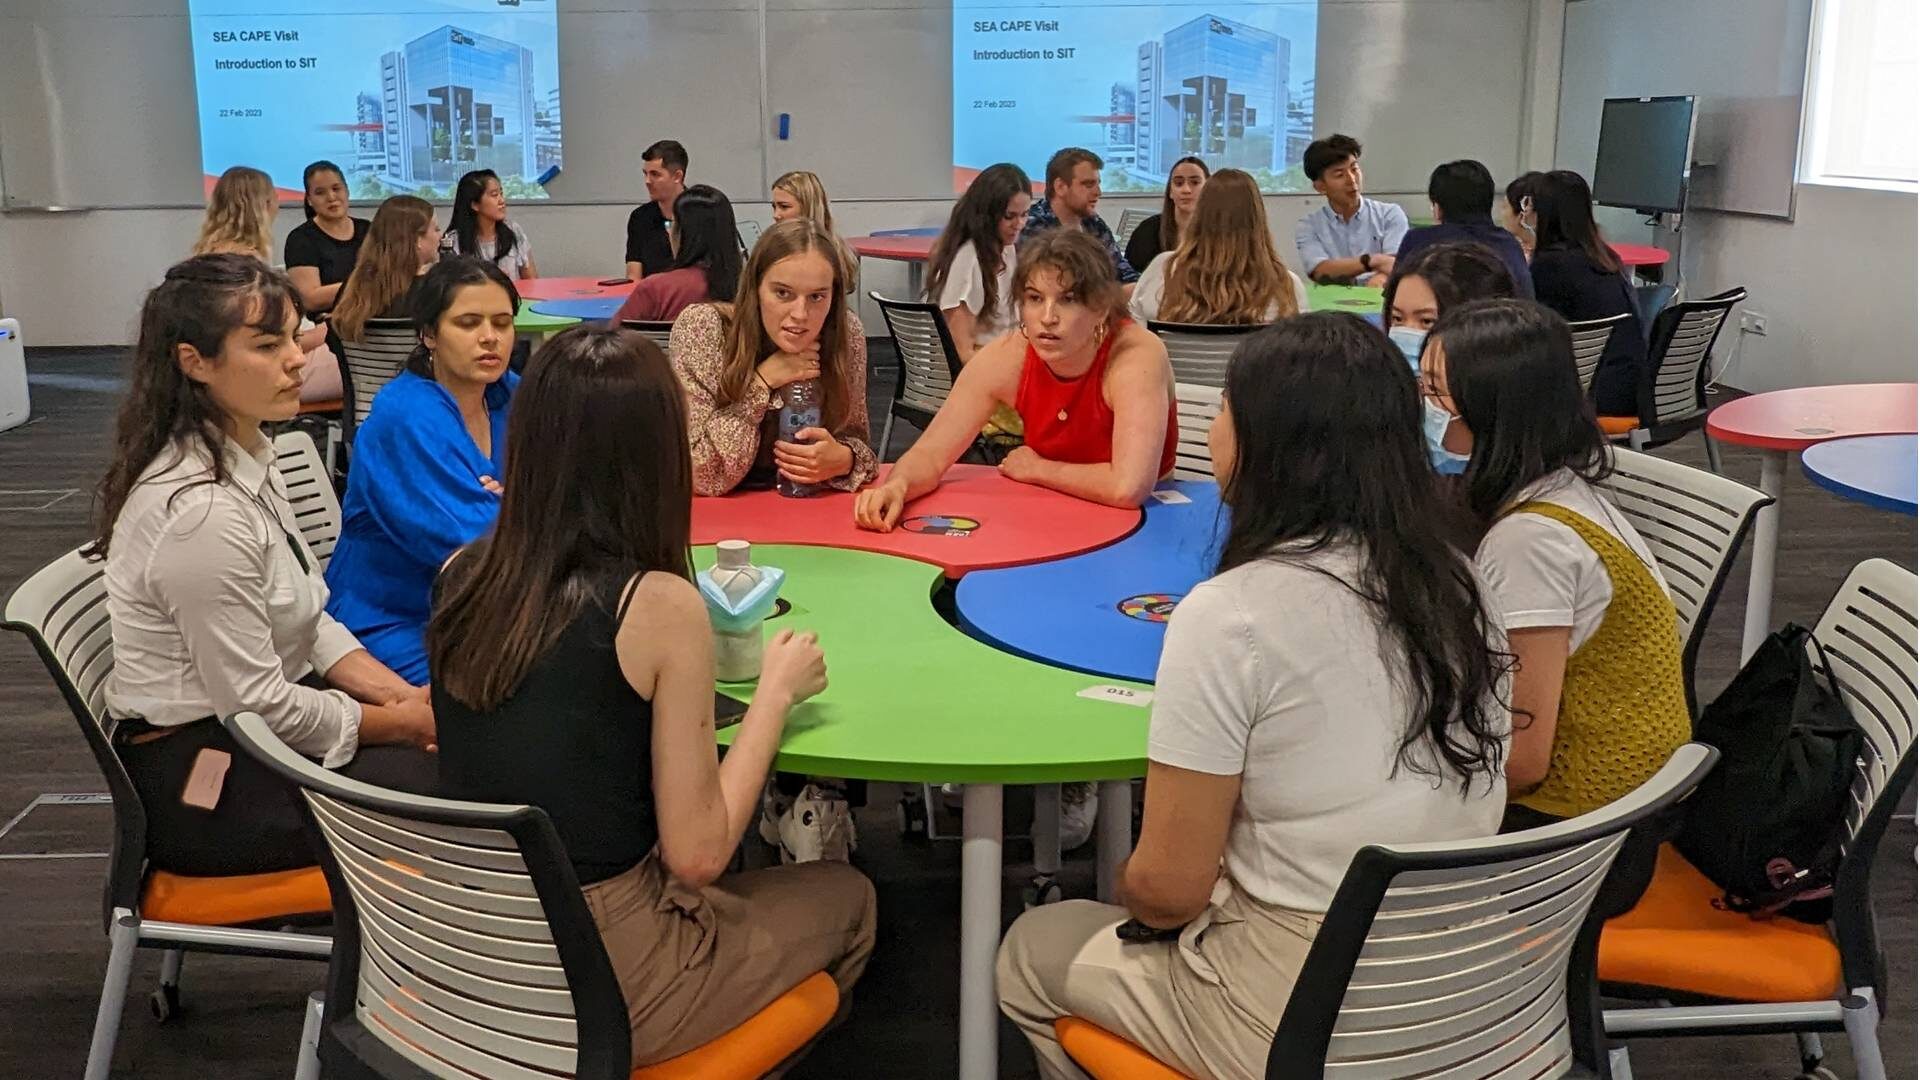 Students and participants interact together at Singapore Institute of Technology.